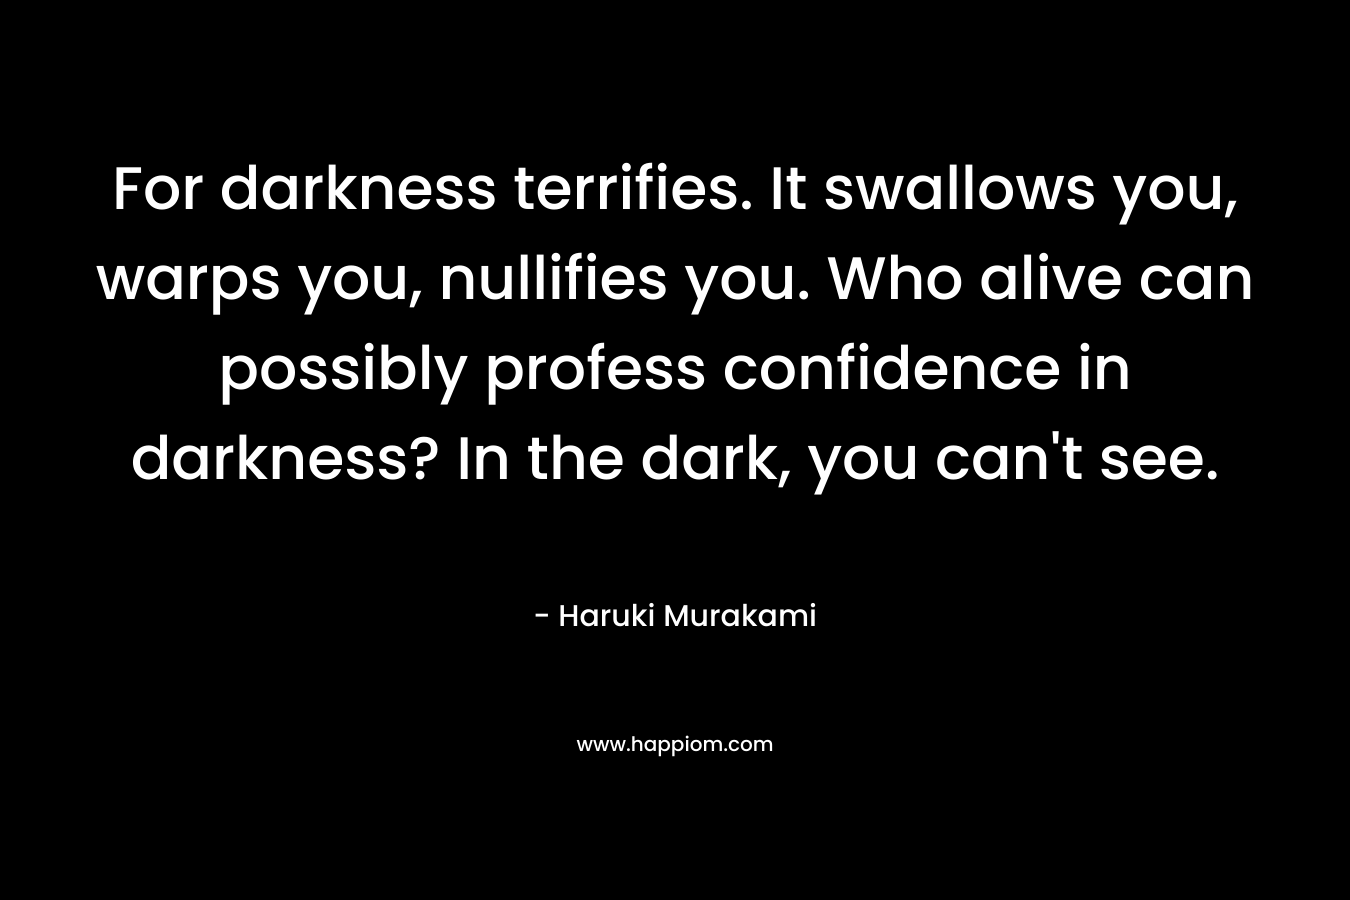 For darkness terrifies. It swallows you, warps you, nullifies you. Who alive can possibly profess confidence in darkness? In the dark, you can't see.